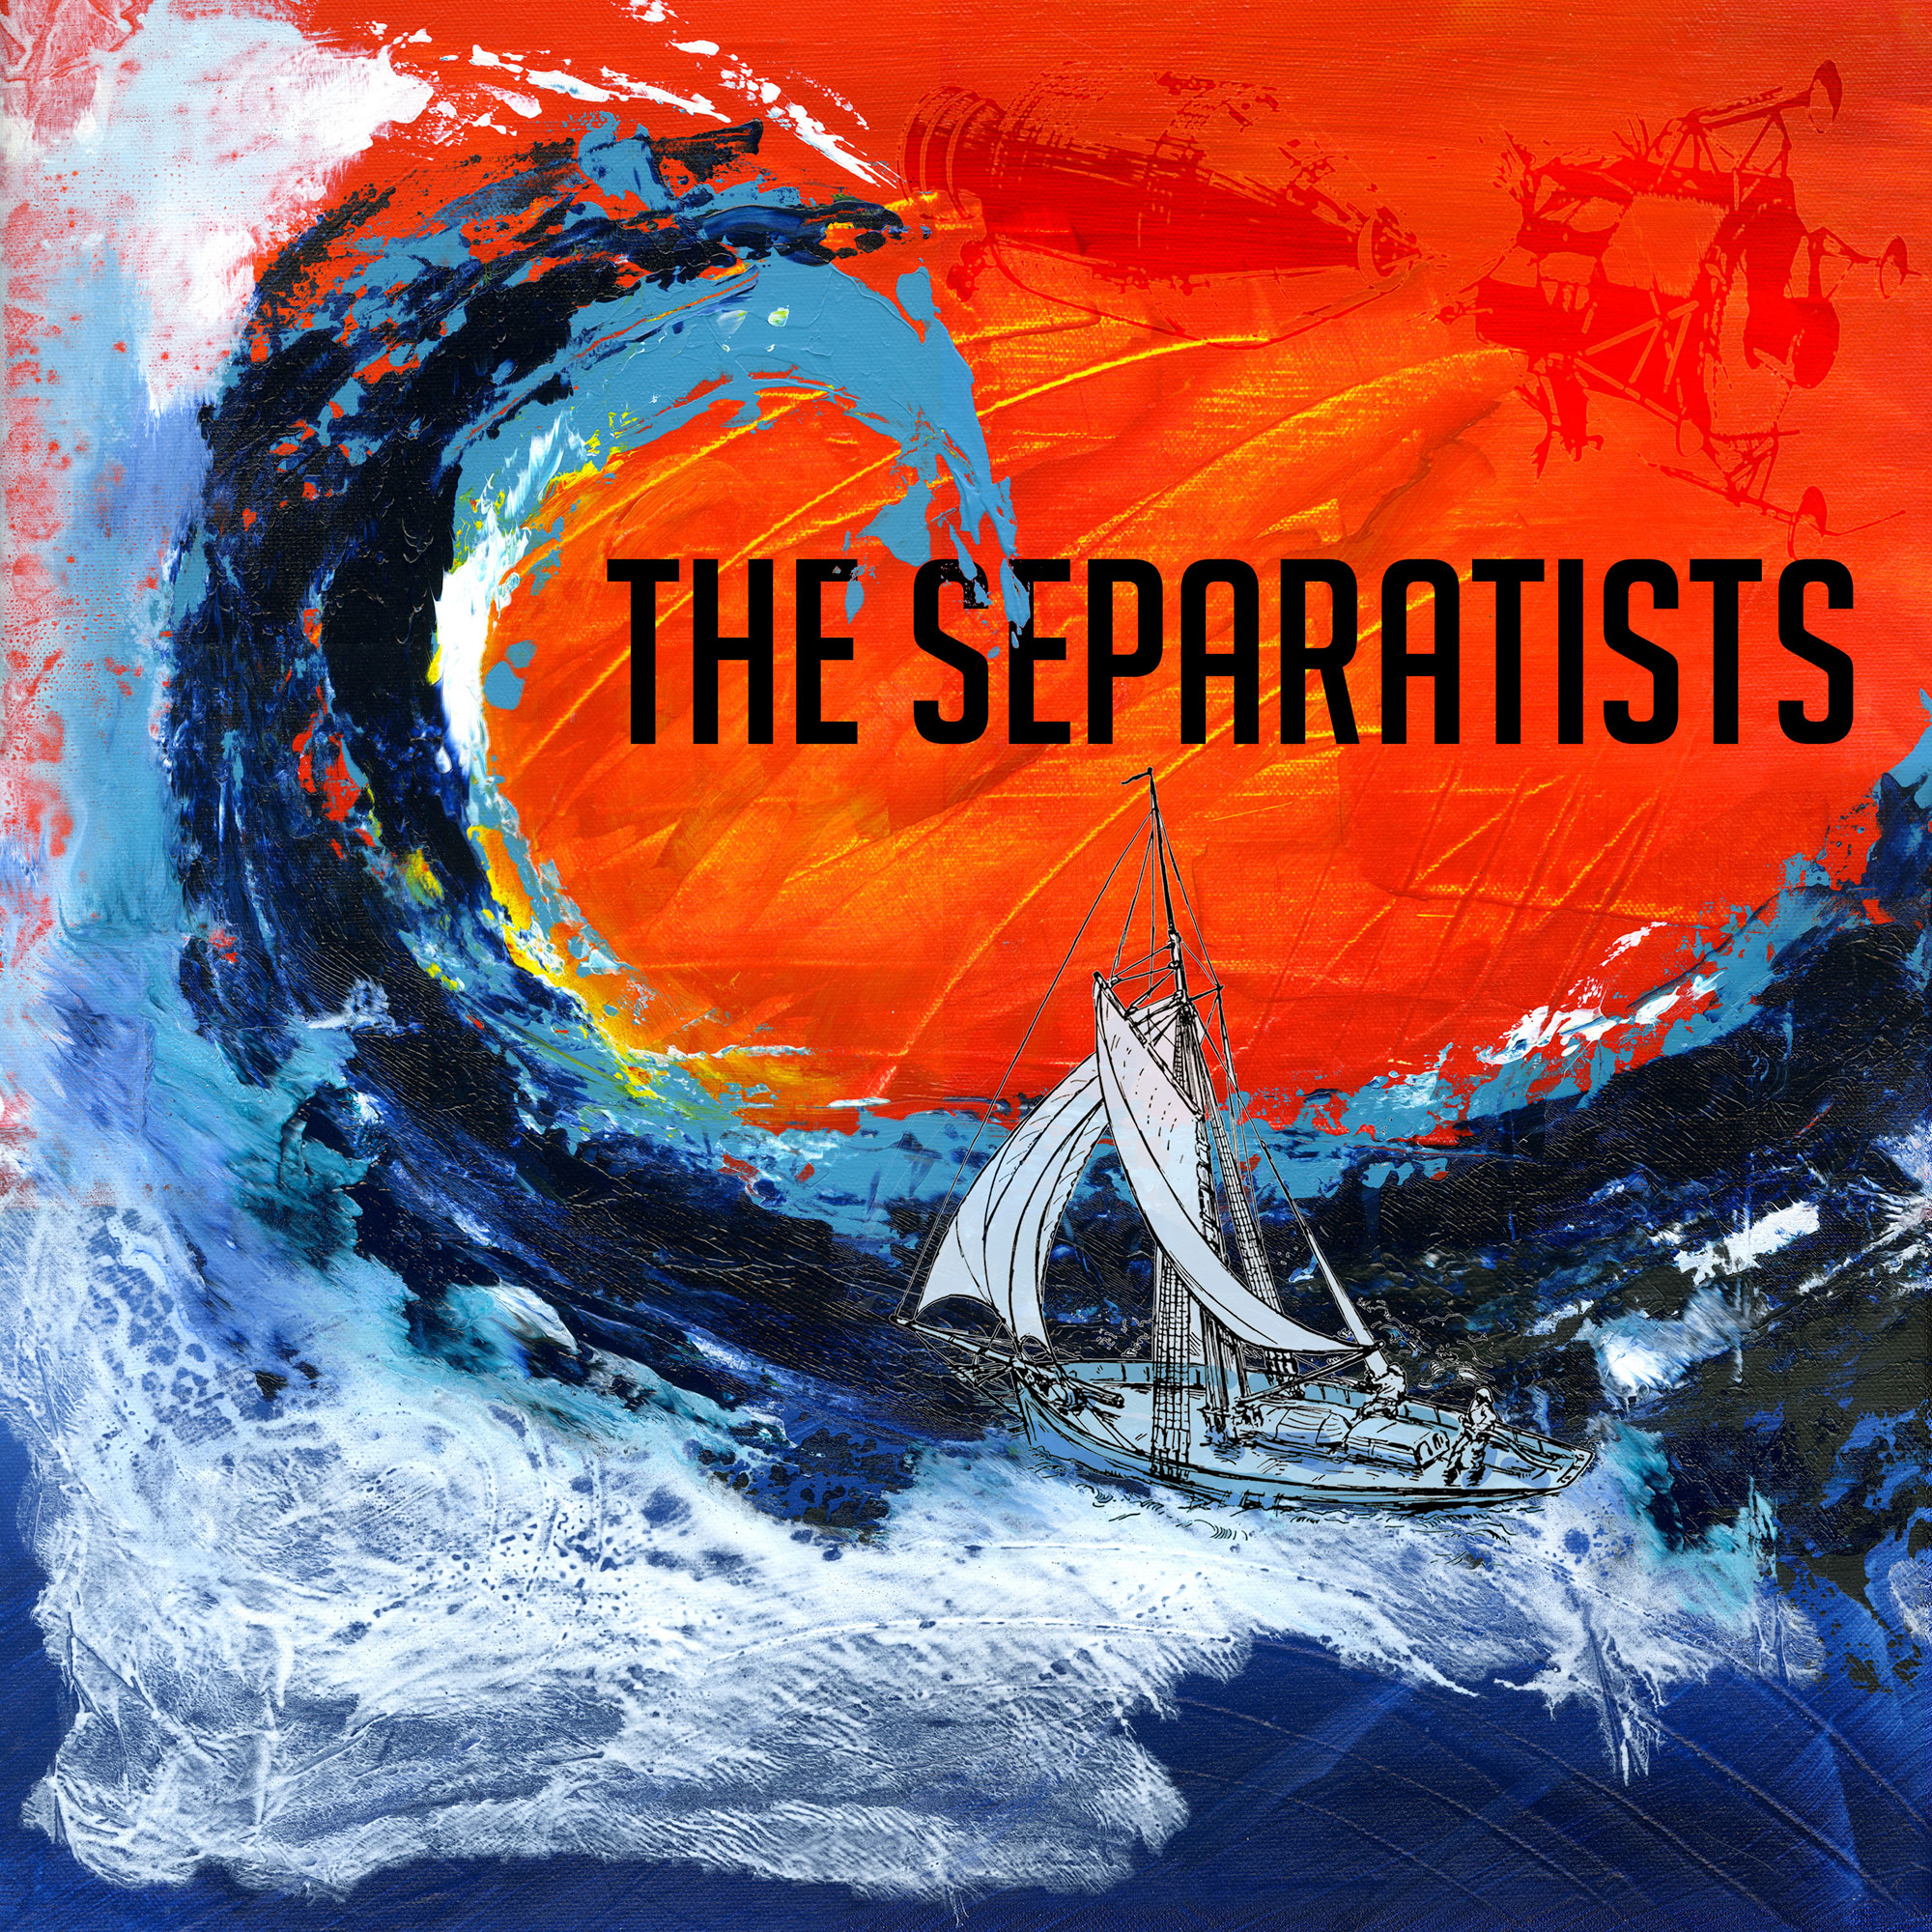 The Separatists Band Waves Album Art